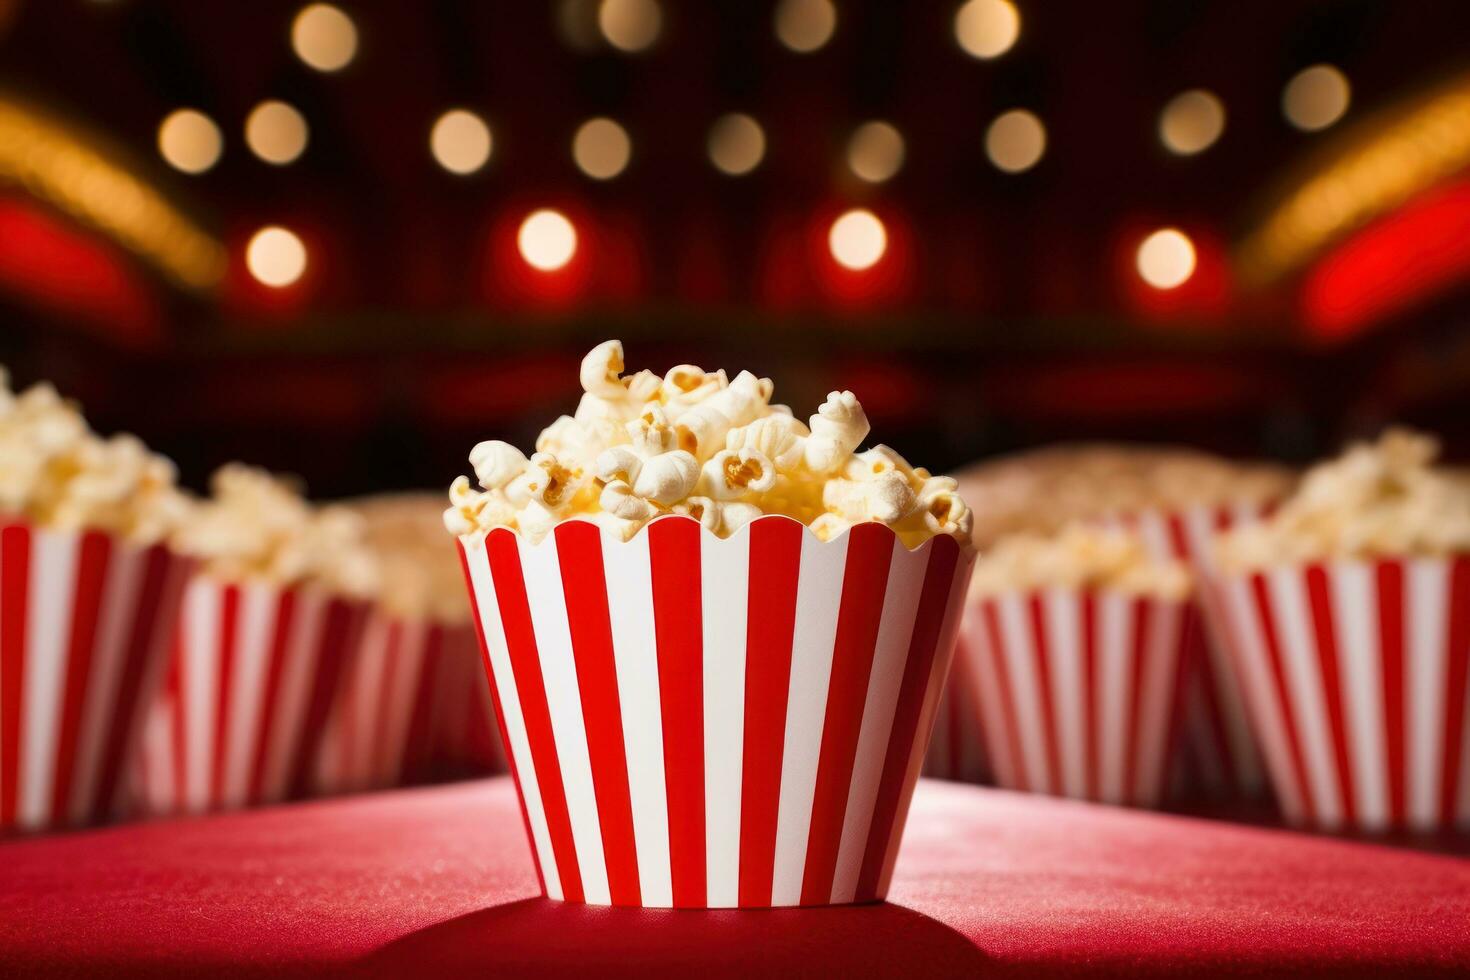 A popcorn striped paper bag in a theater surrounded by lights photo